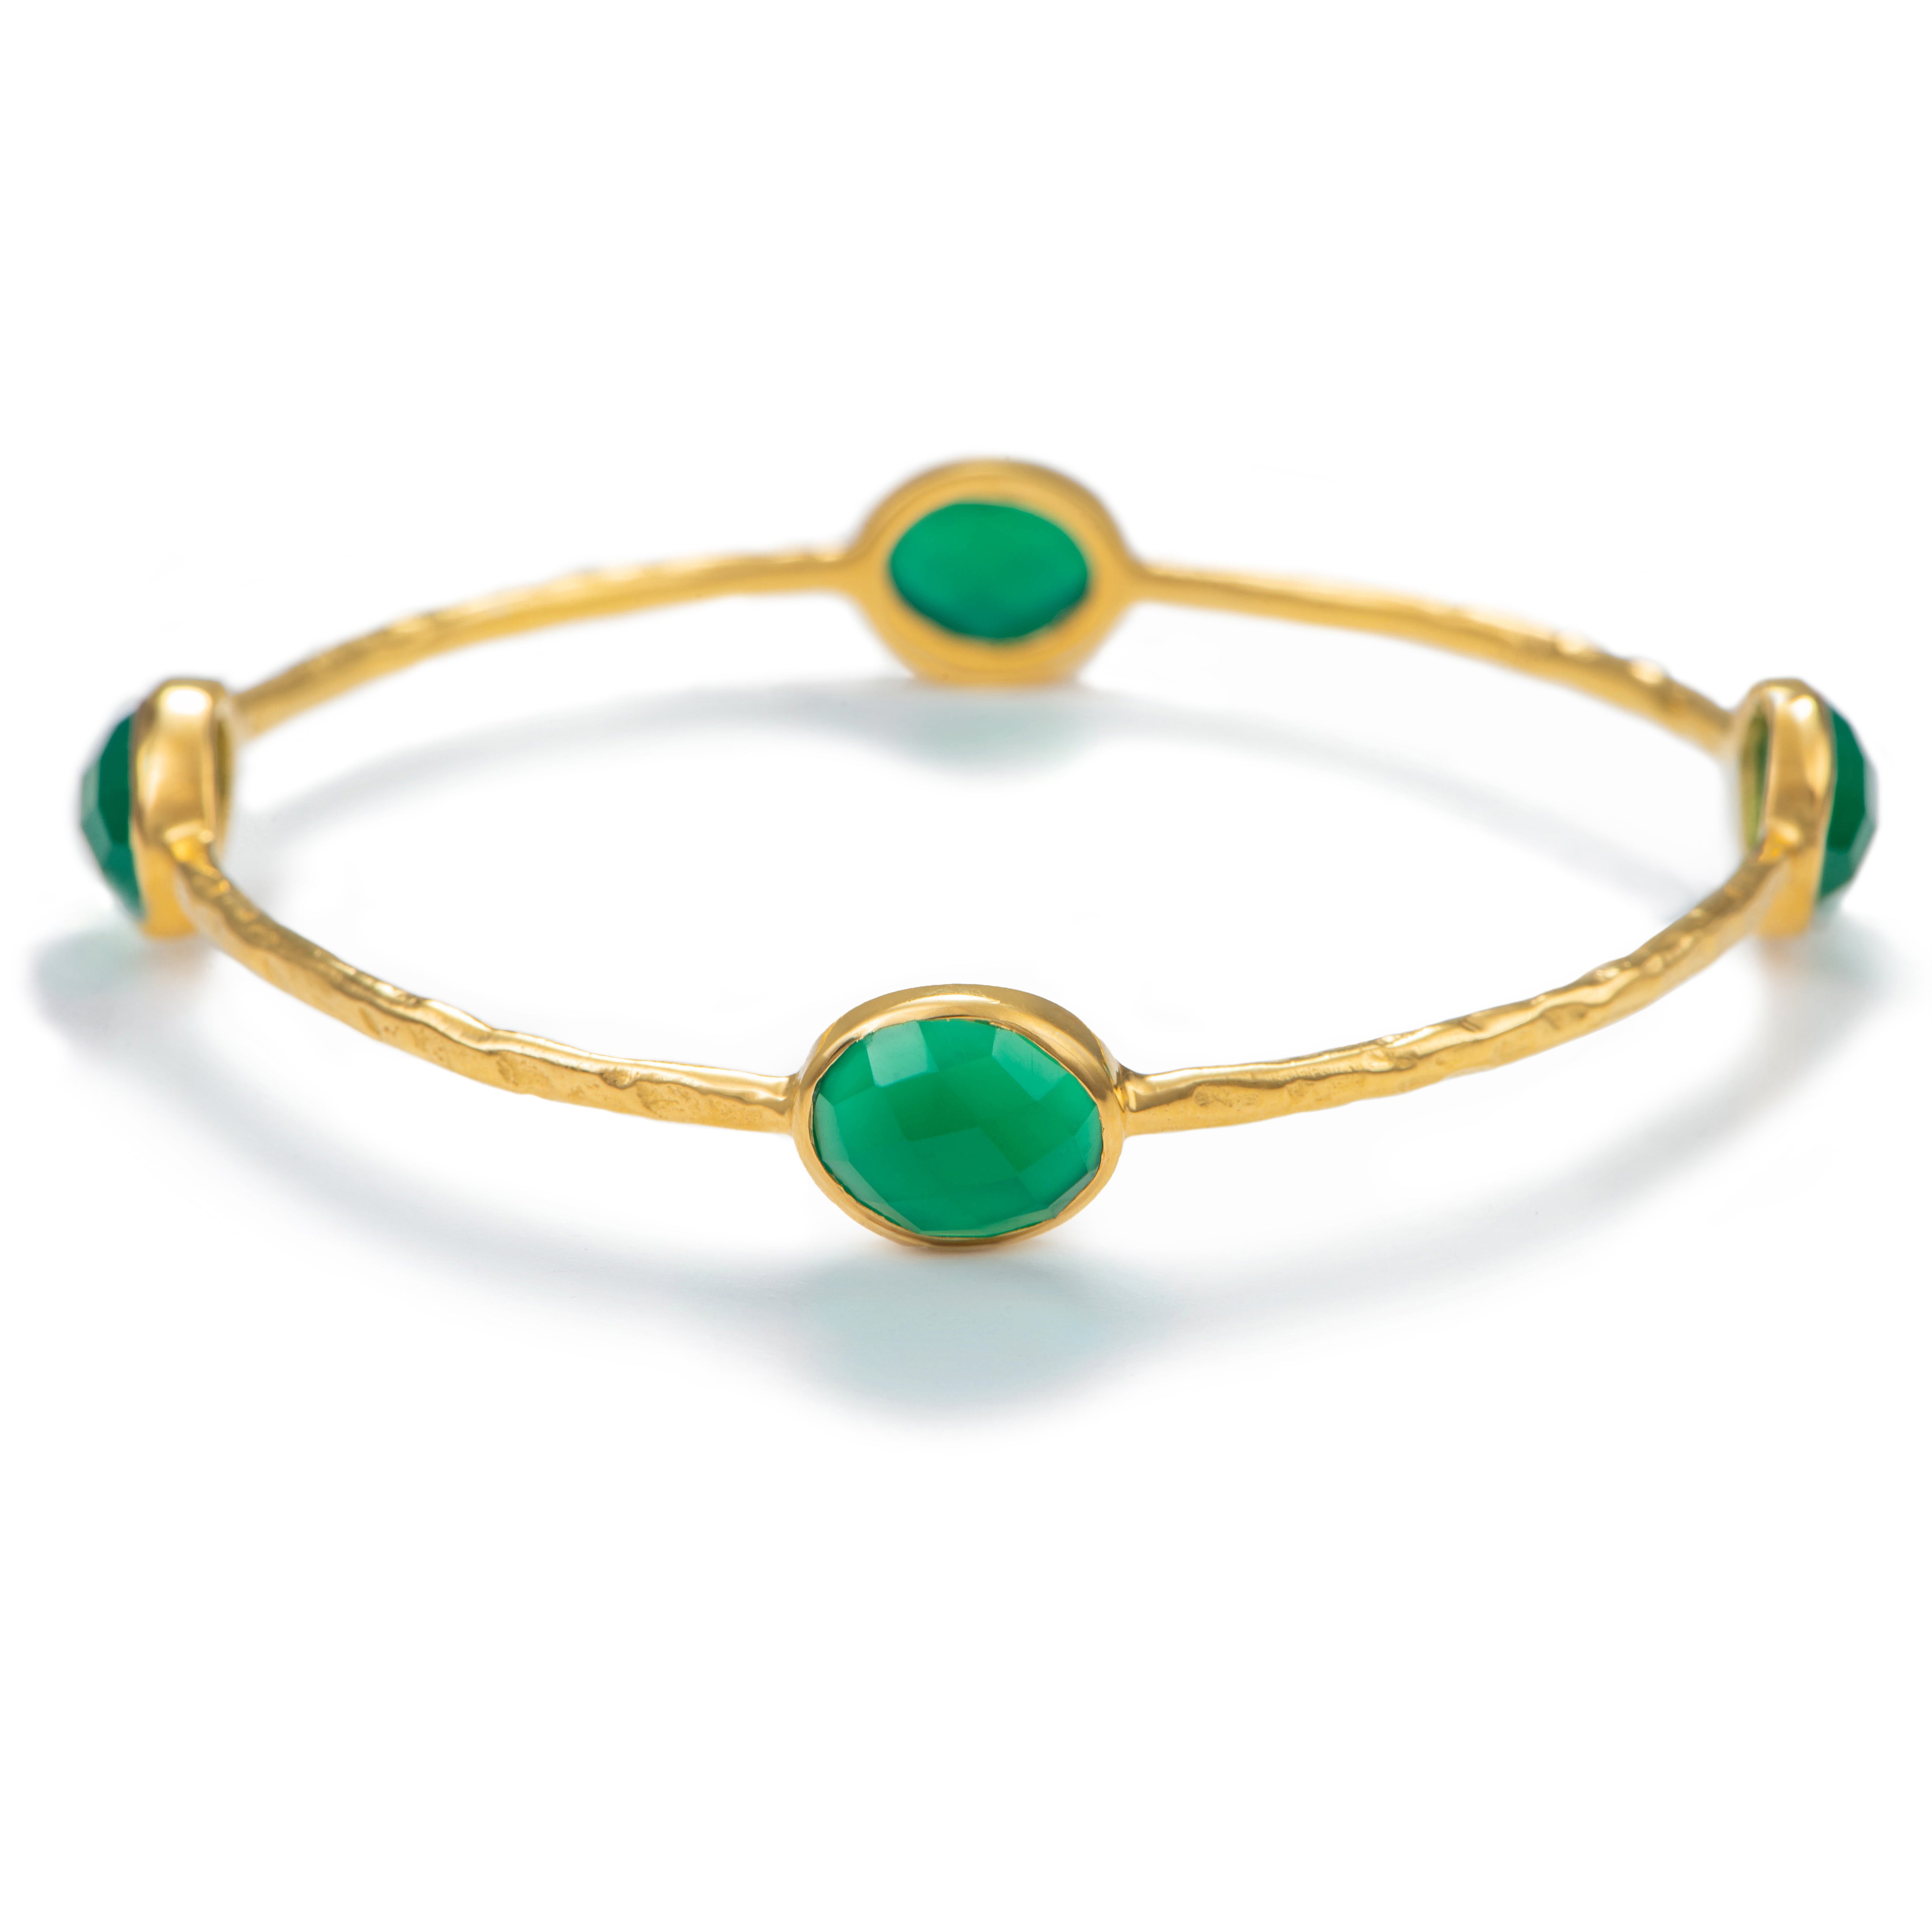 Green Onyx Gemstone Bangle in Gold Plated Sterling Silver